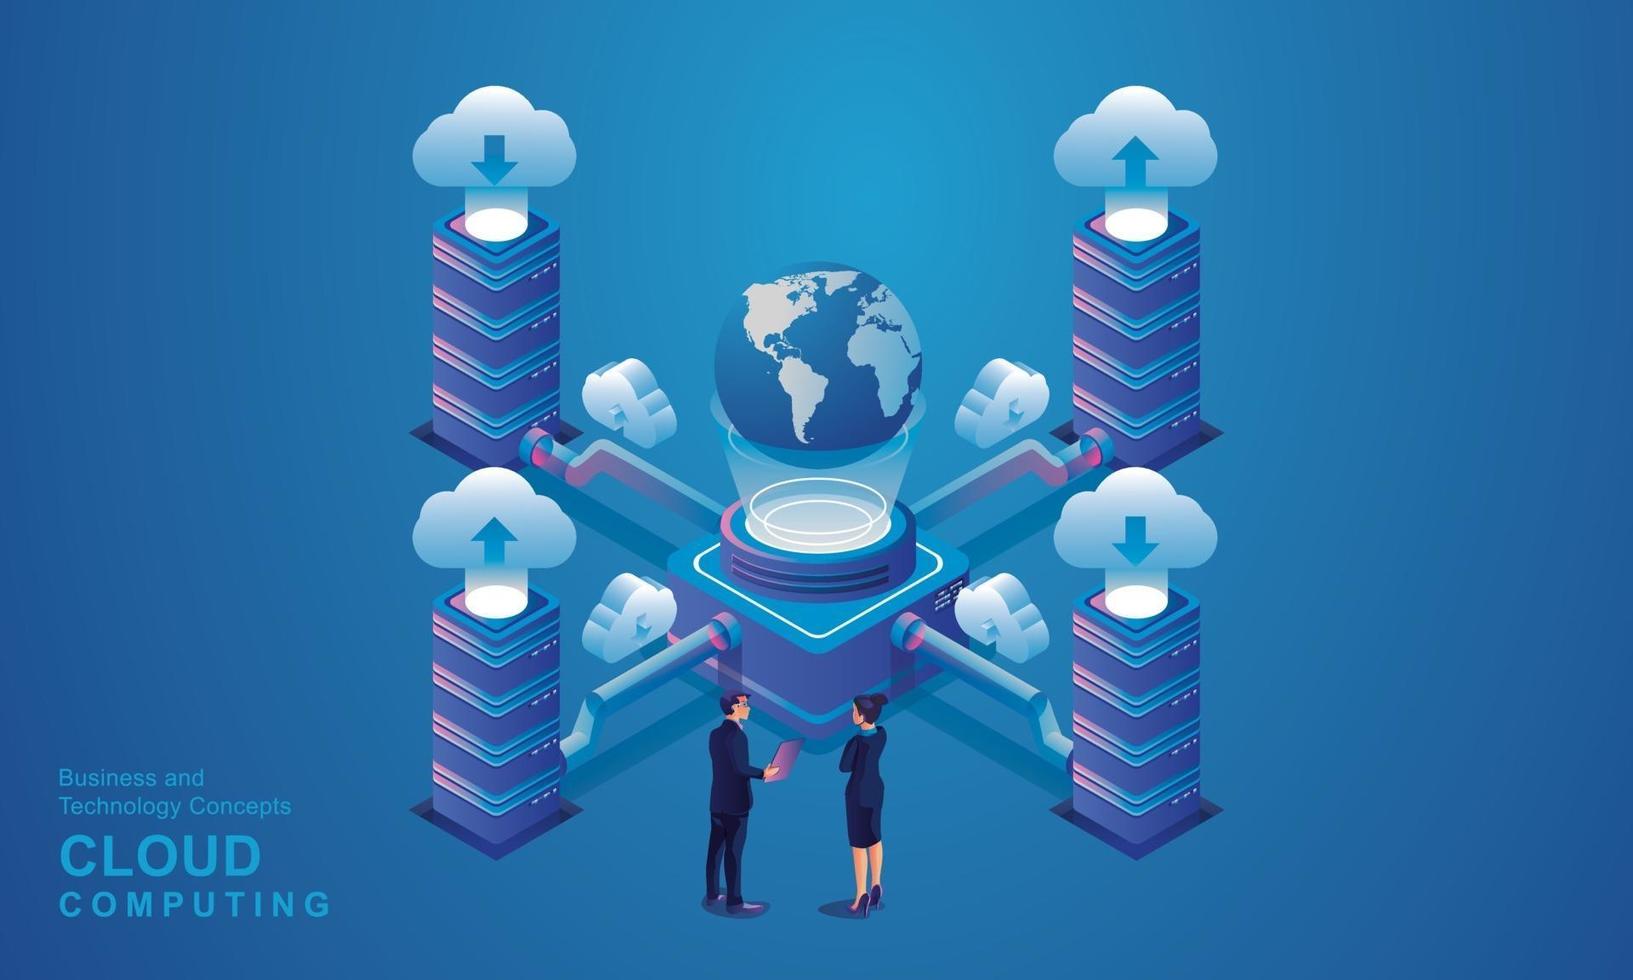 Computer technology server room digital device Isometric concept Cloud storage communication with the network Online devices uploads download information data in a database on cloud services vector